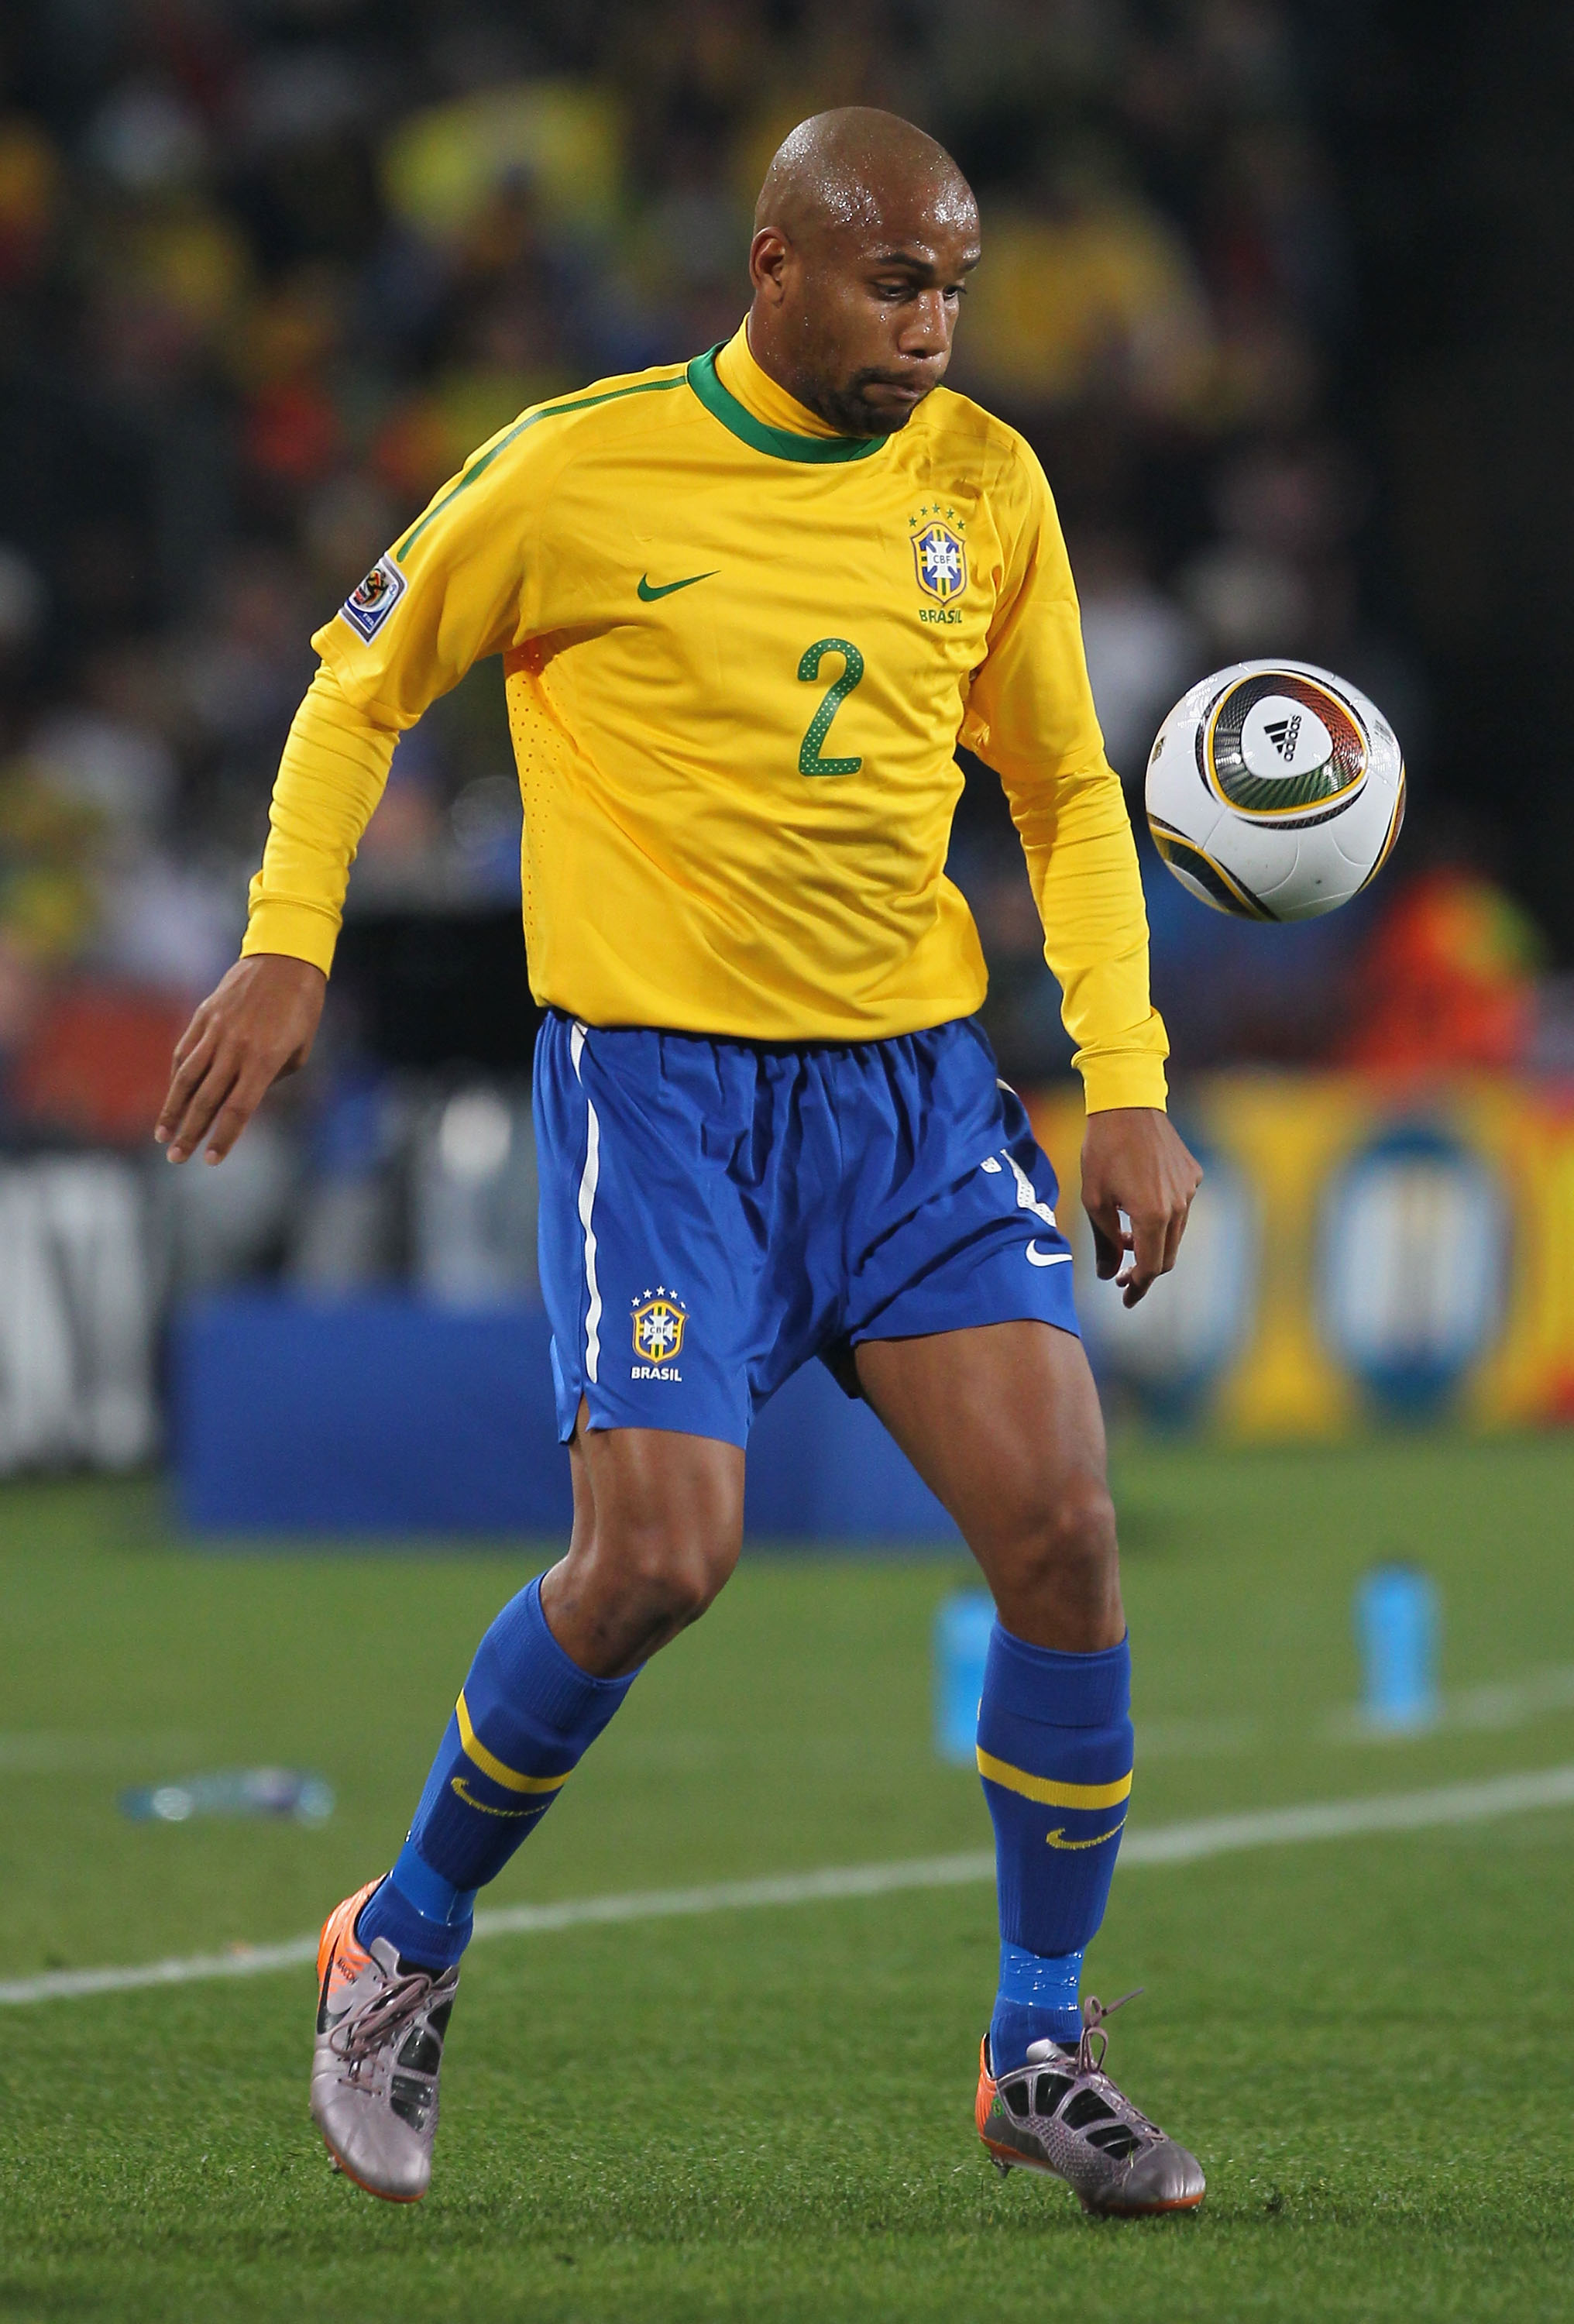 JOHANNESBURG, SOUTH AFRICA - JUNE 28:  Maicon of Brazil controls the ball during the 2010 FIFA World Cup South Africa Round of Sixteen match between Brazil and Chile at Ellis Park Stadium on June 28, 2010 in Johannesburg, South Africa.  (Photo by Clive Ro